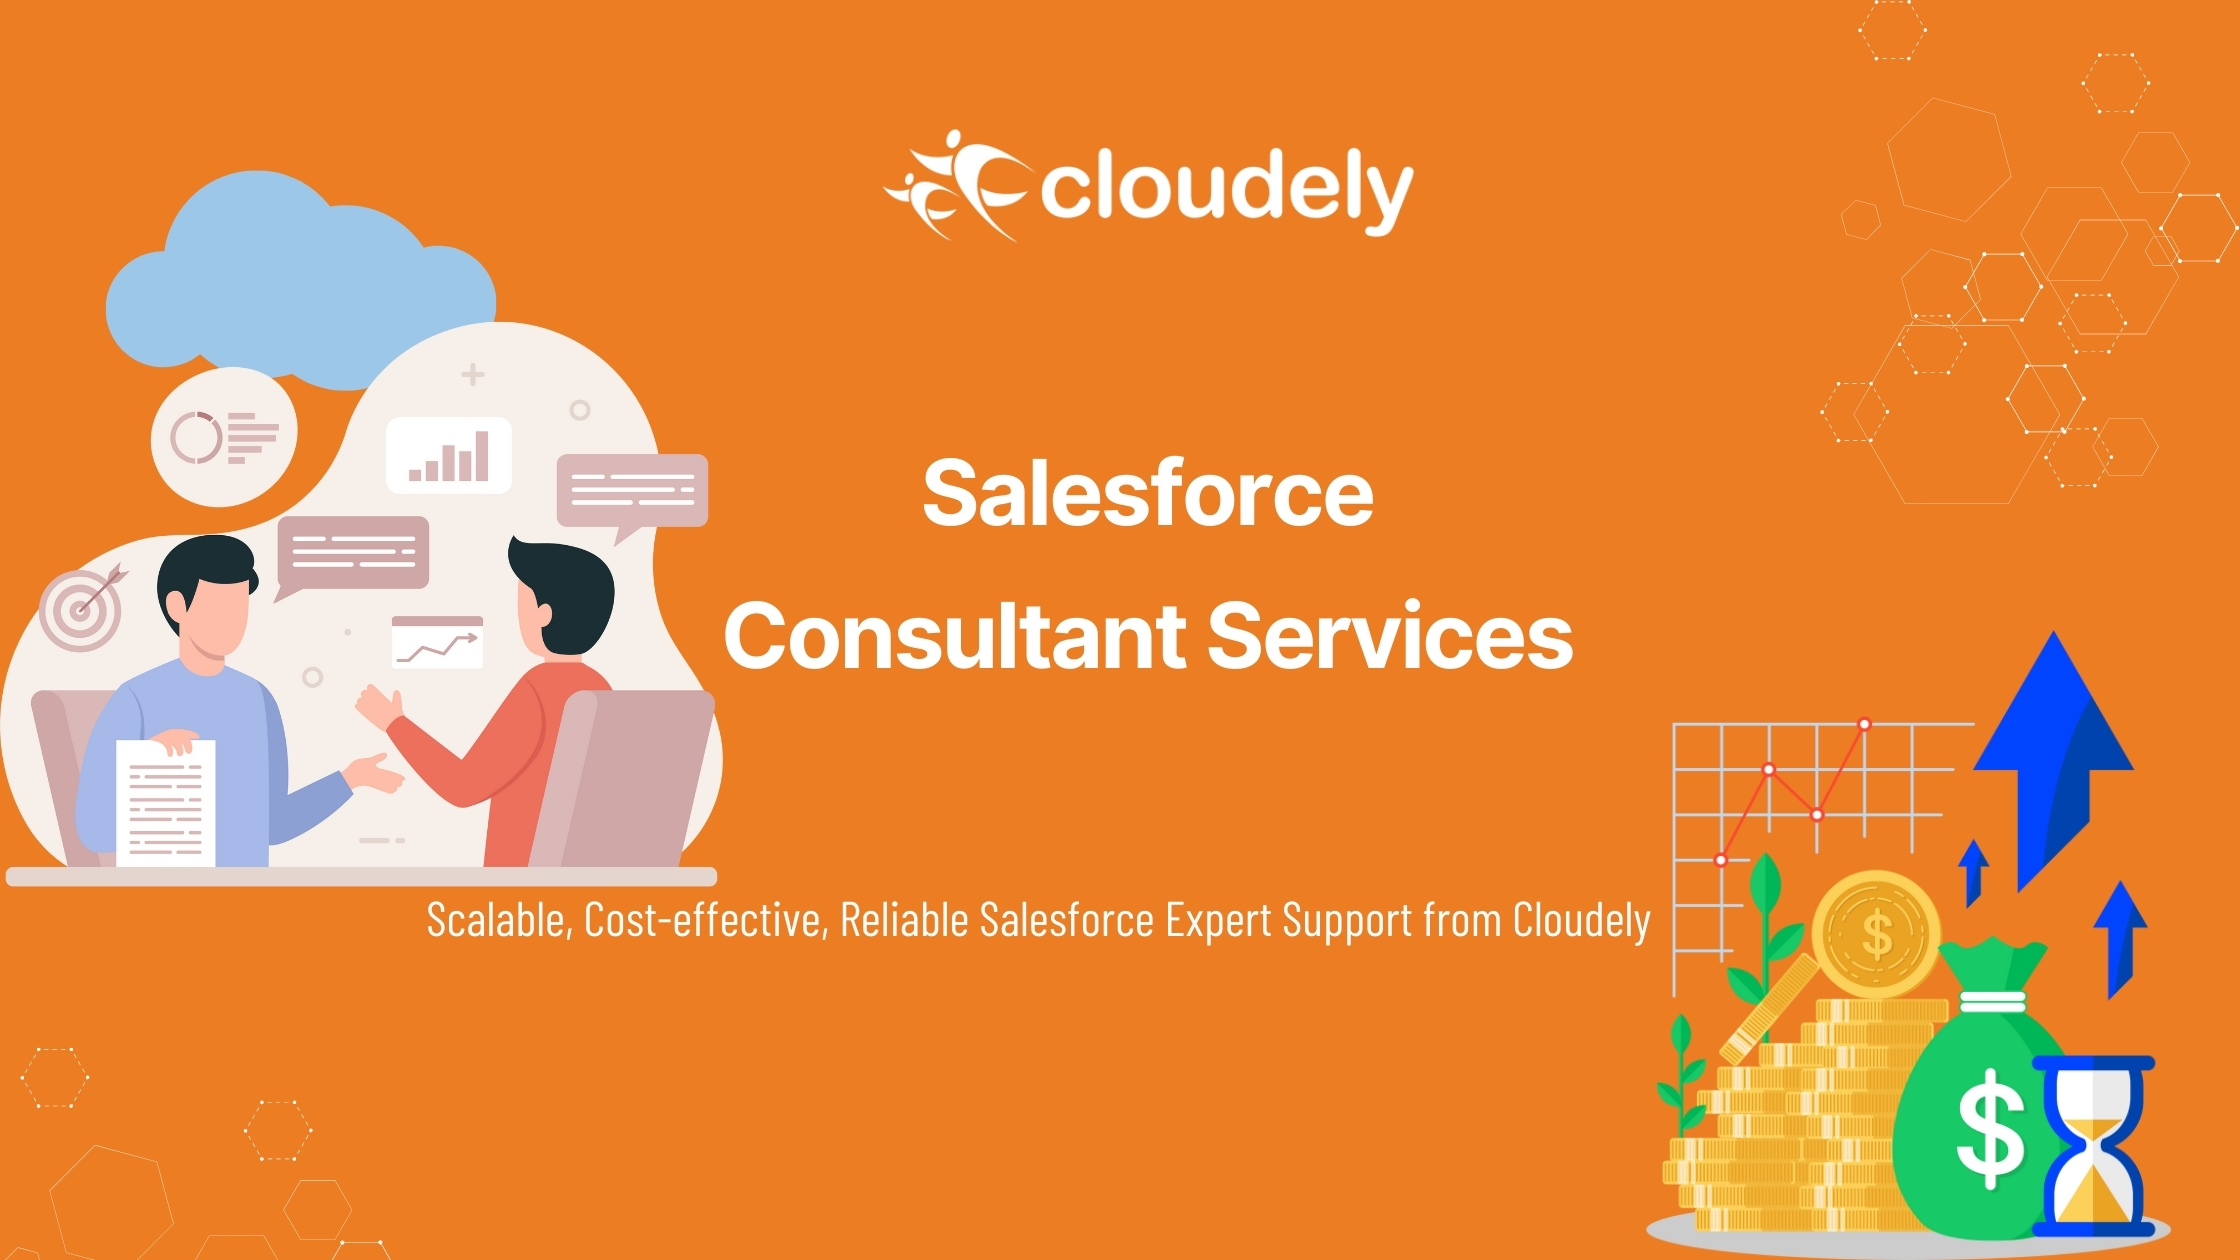 Cloudely Salesforce consultant services